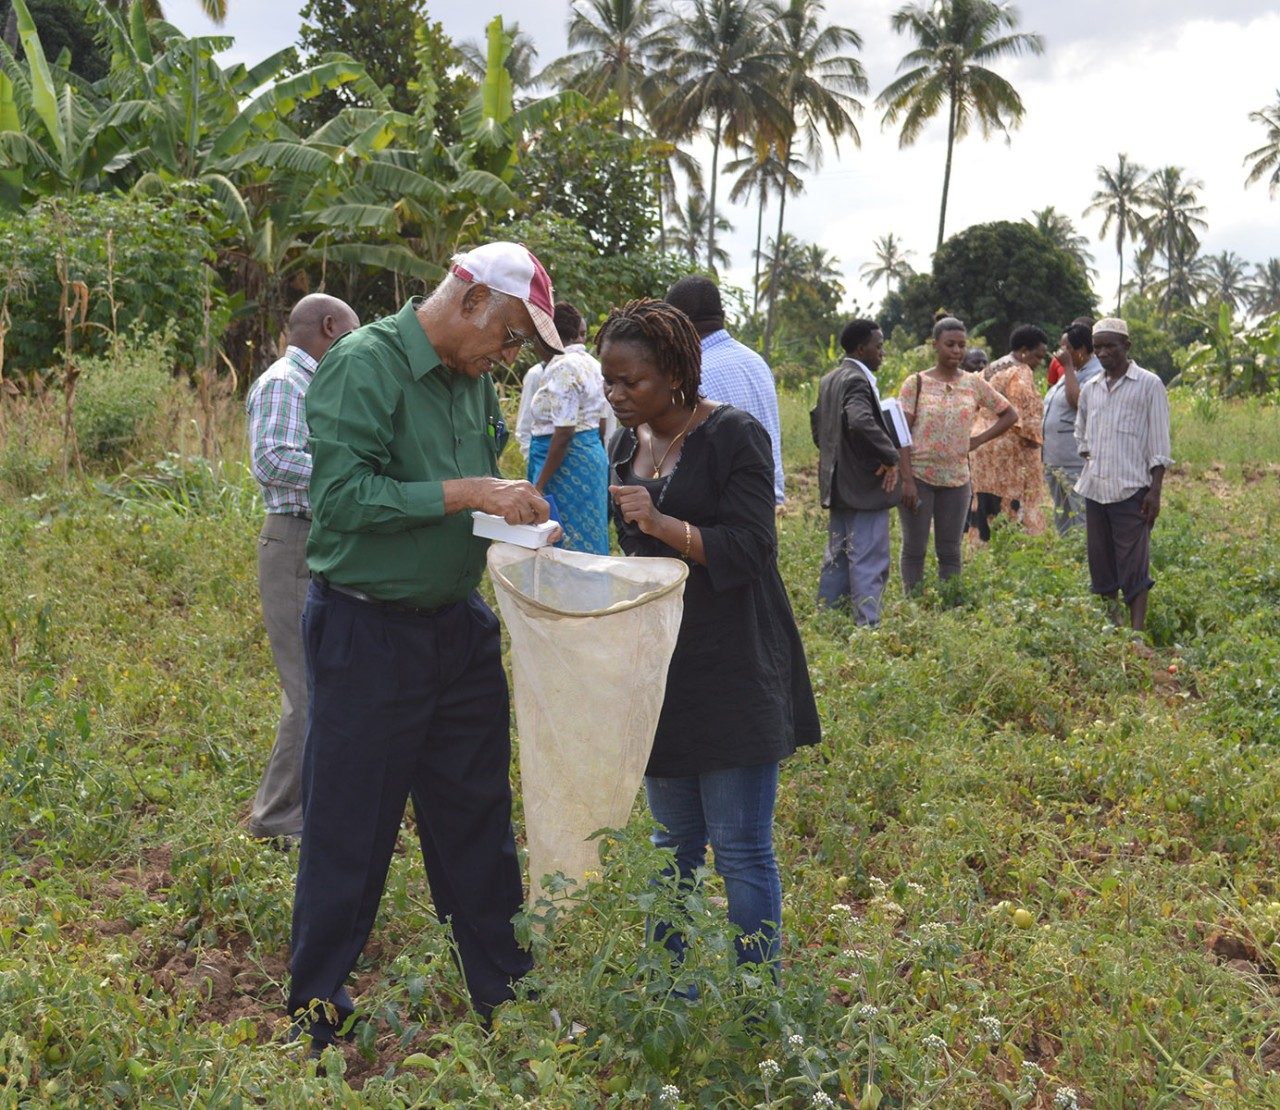 Muni Muniappan helps a workshop participant identify larvae of the tomato leafminer at a workshop on the destructive moth in Tanzania.